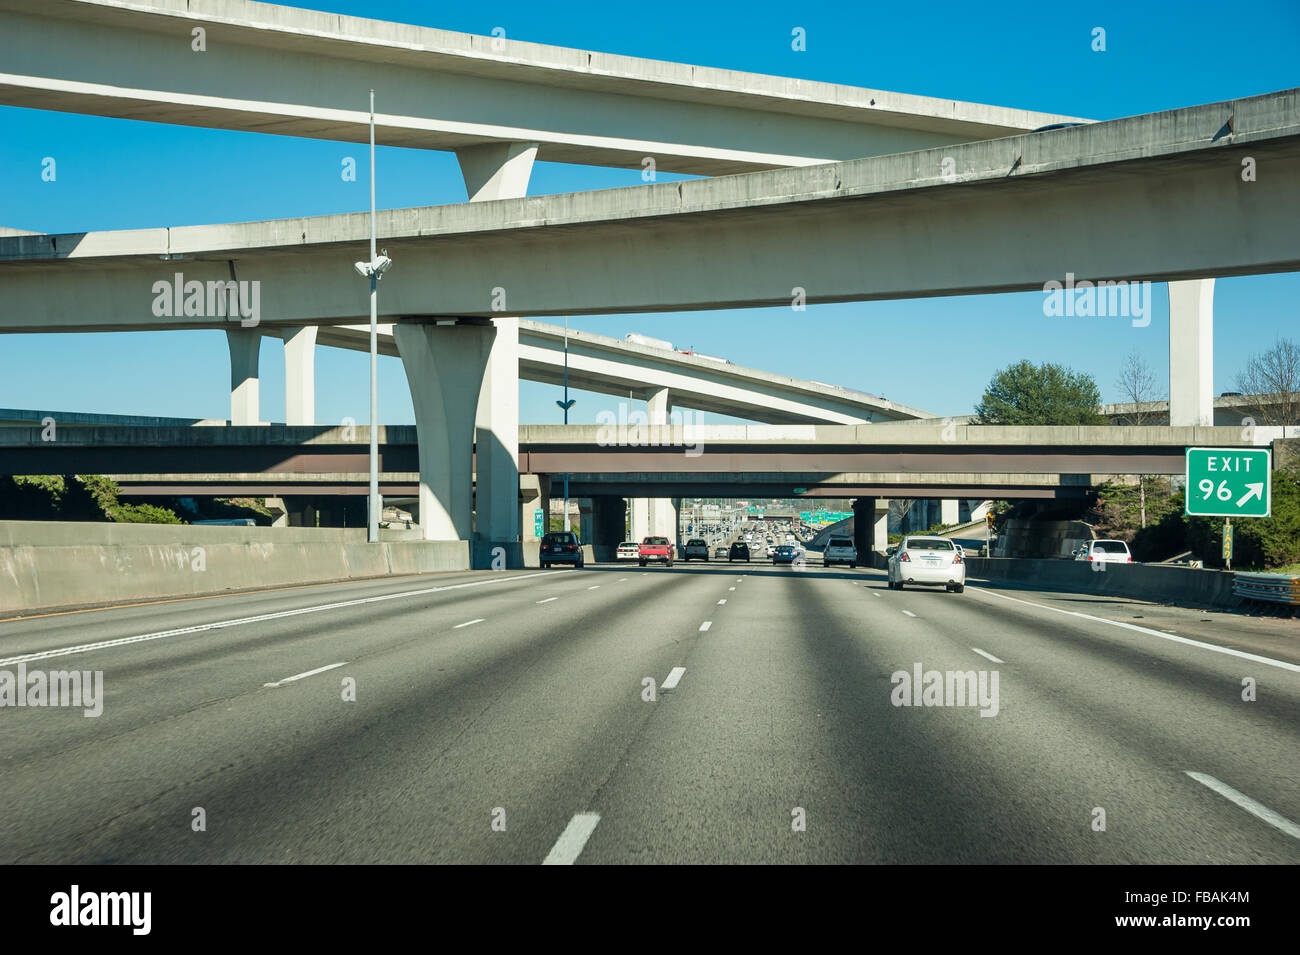 Atlanta, Georgia's Spaghetti Junction, where I-85 and I-285 cross paths amidst a jumble of interstate exits and connectors. USA. Stock Photo